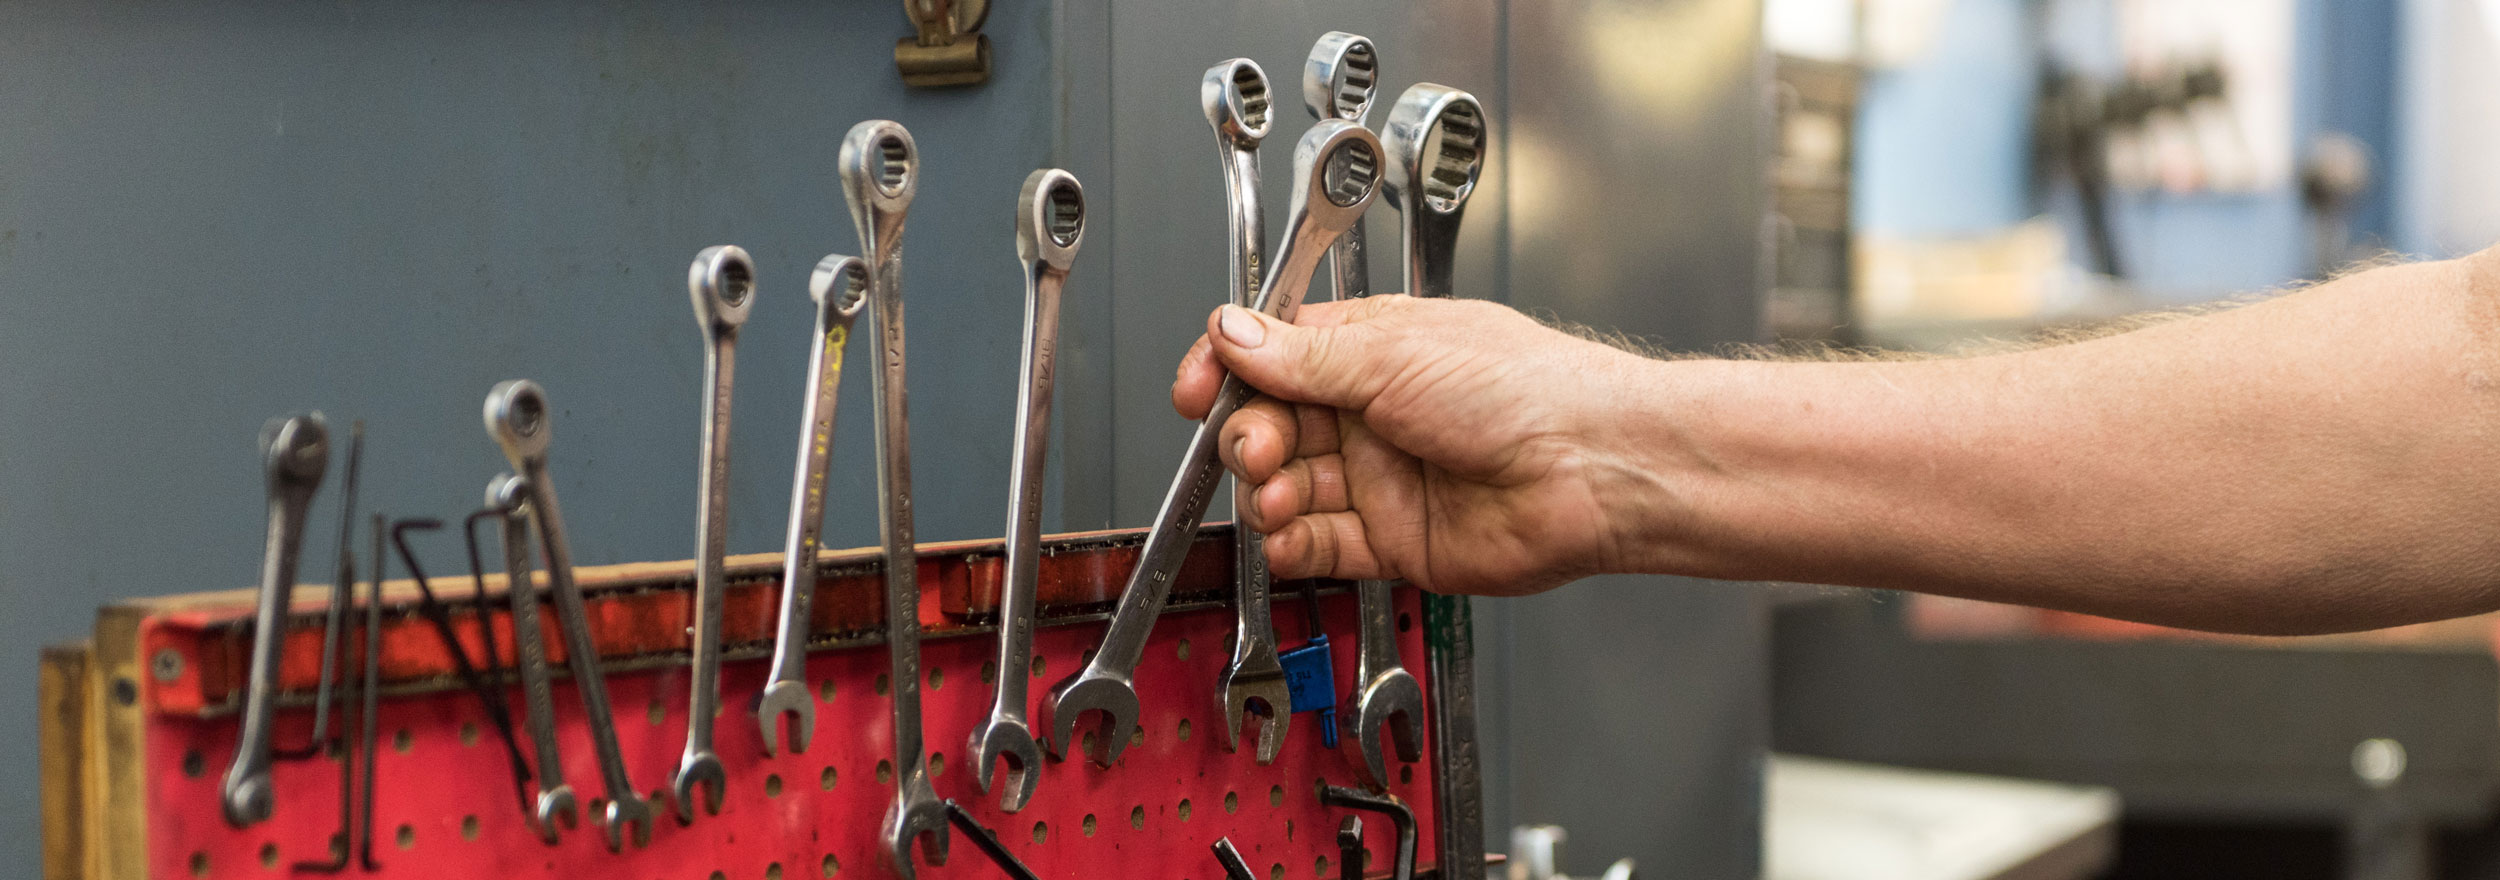 Hand reaching for wrench in red toolbox